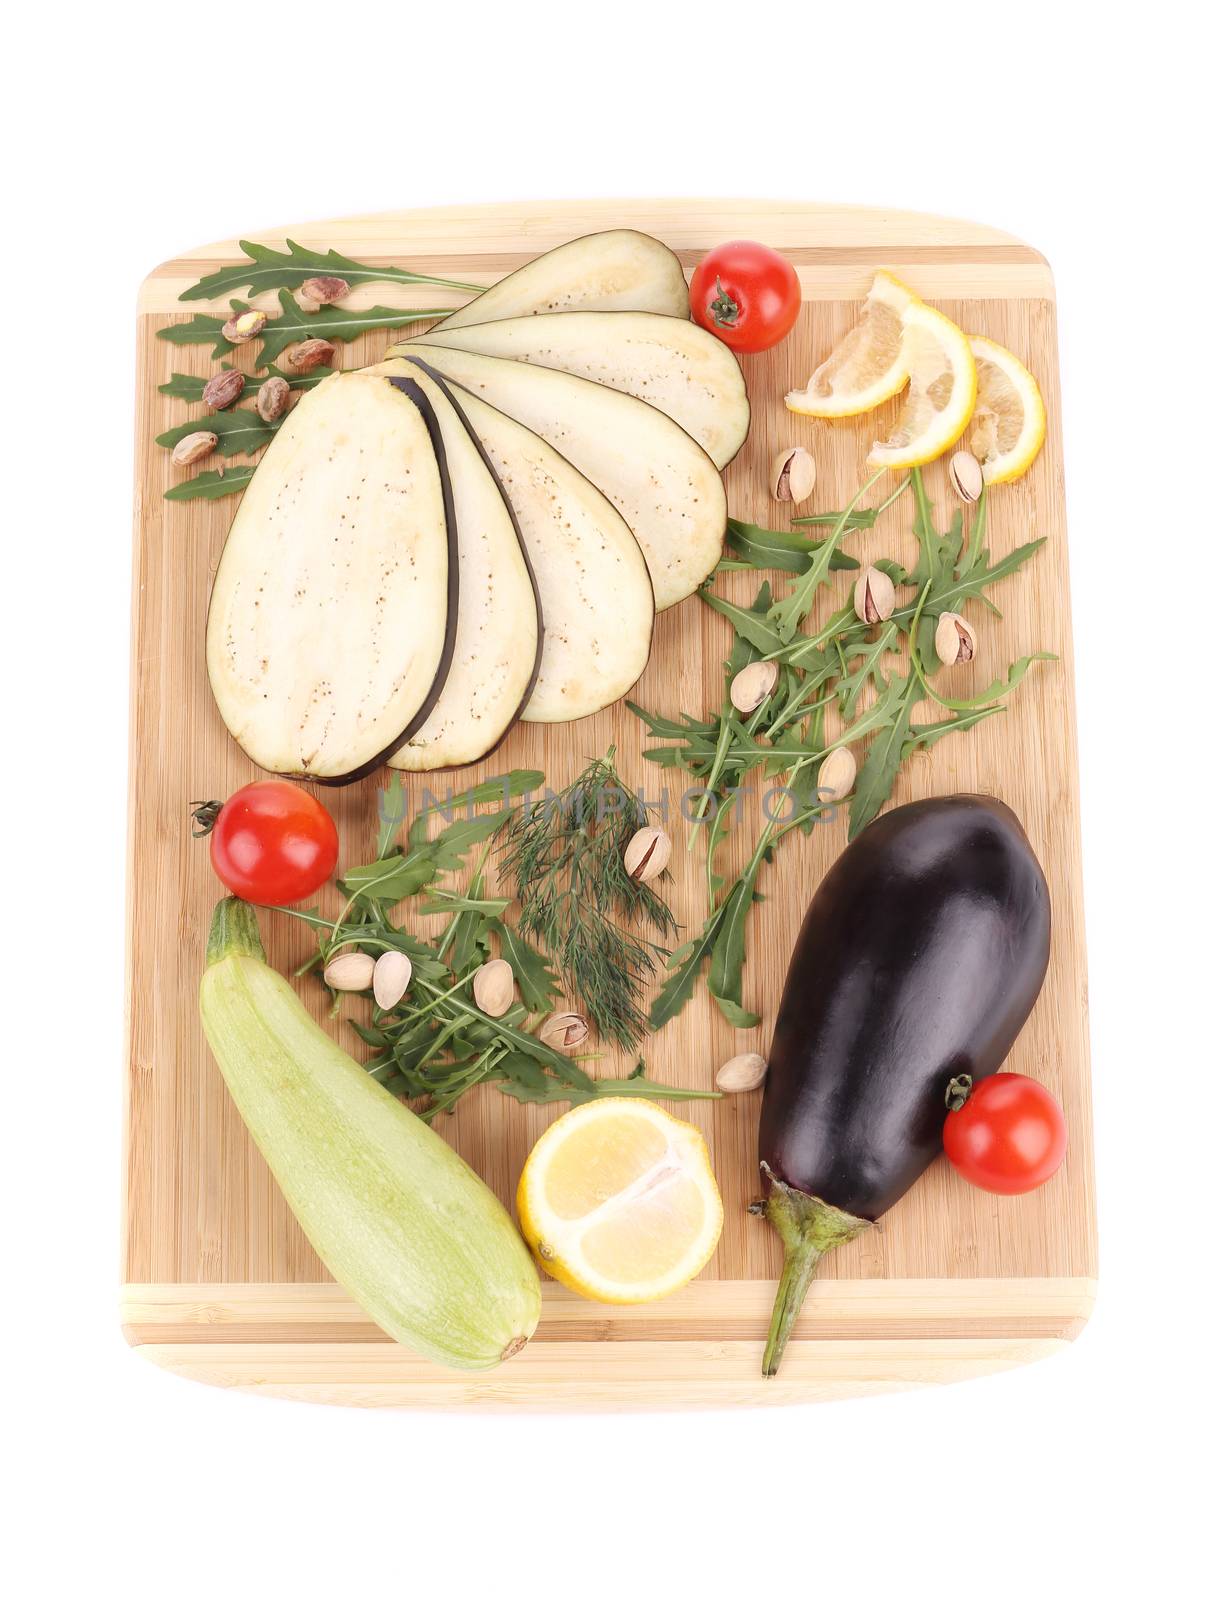 Vegetables with lemon on wooden platter. Isolated on a white background.